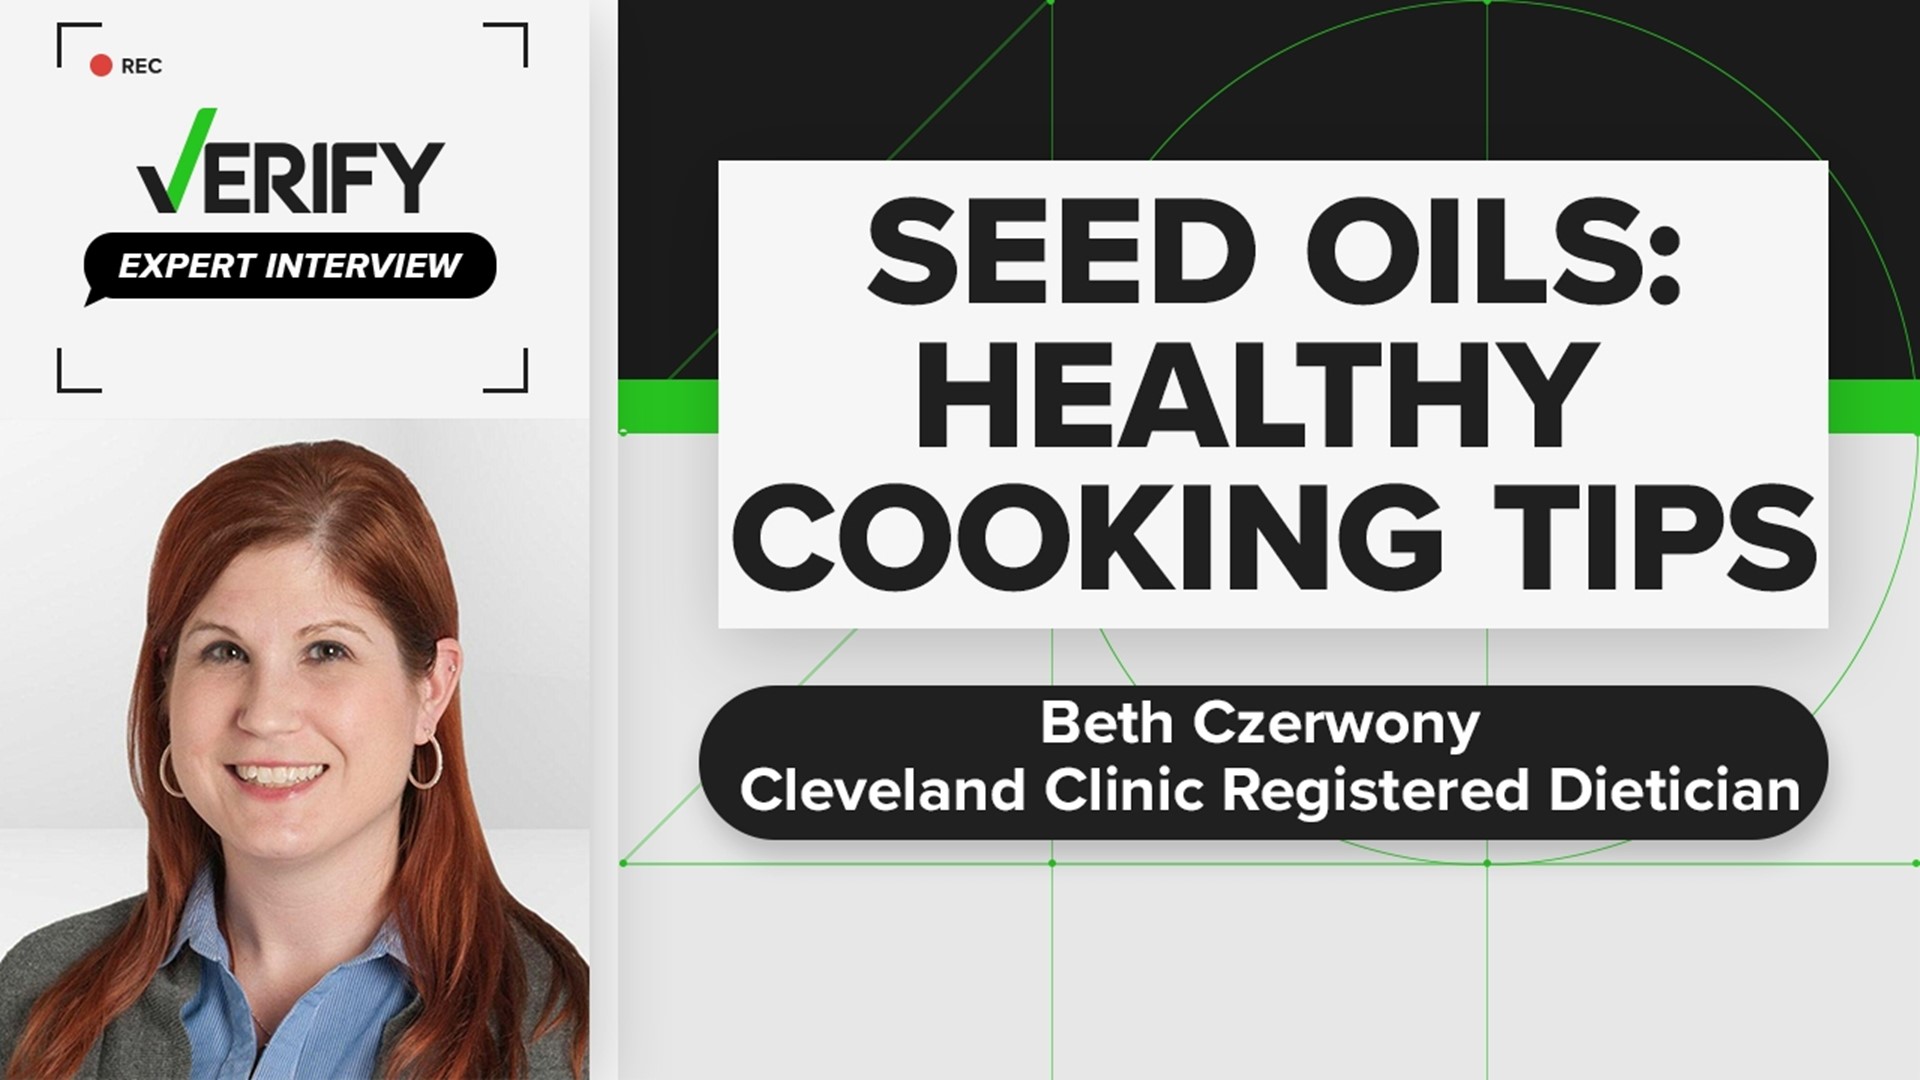 Beth Czerwony is a registered dietician at the Cleveland Clinic and explains important information about seed oils.